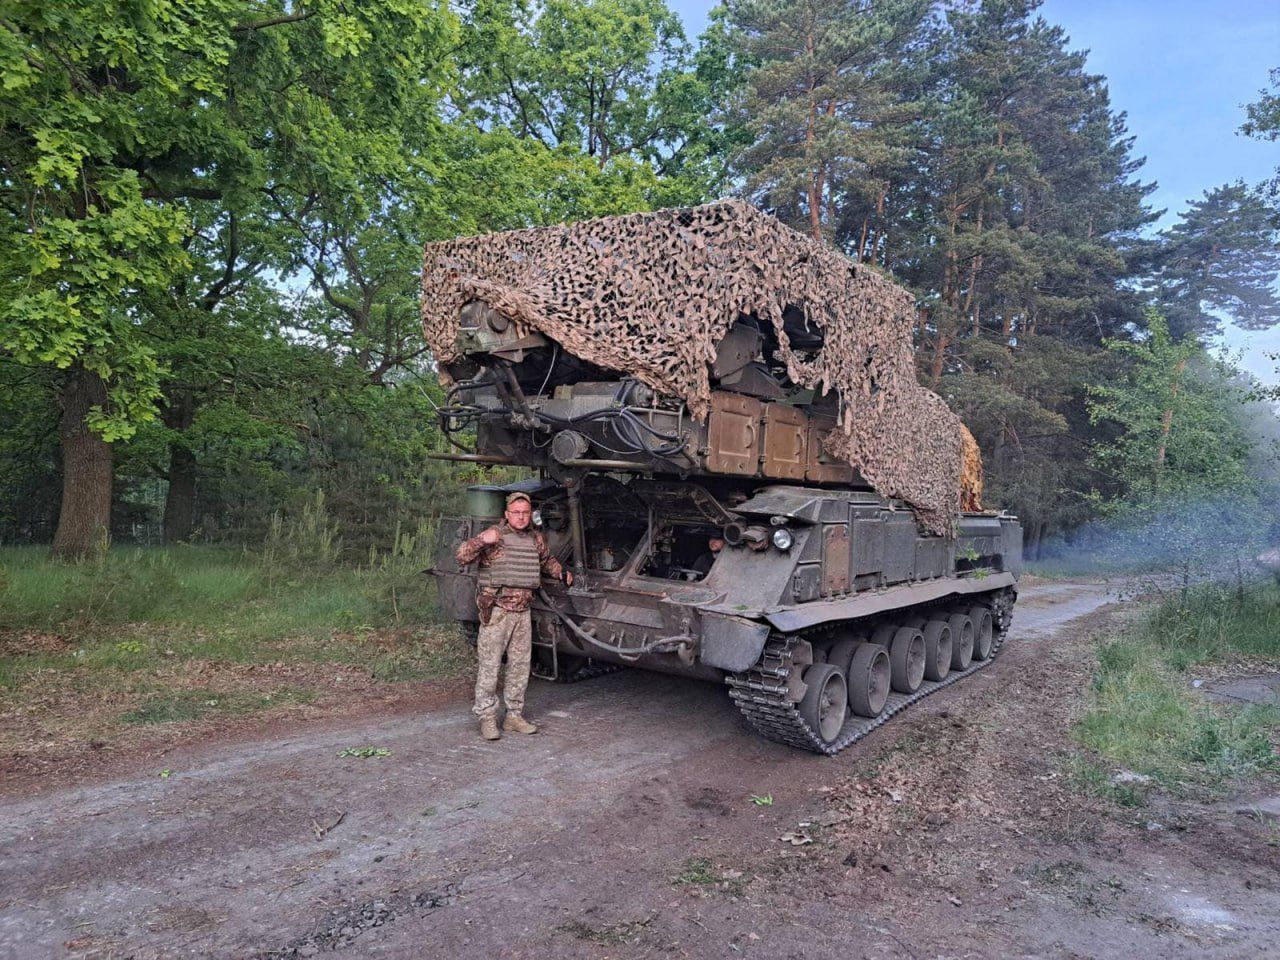 Ukrainian FrankenSAM anti-aircraft system based on the post-Soviet Buk-M1 integrated with Western missiles.